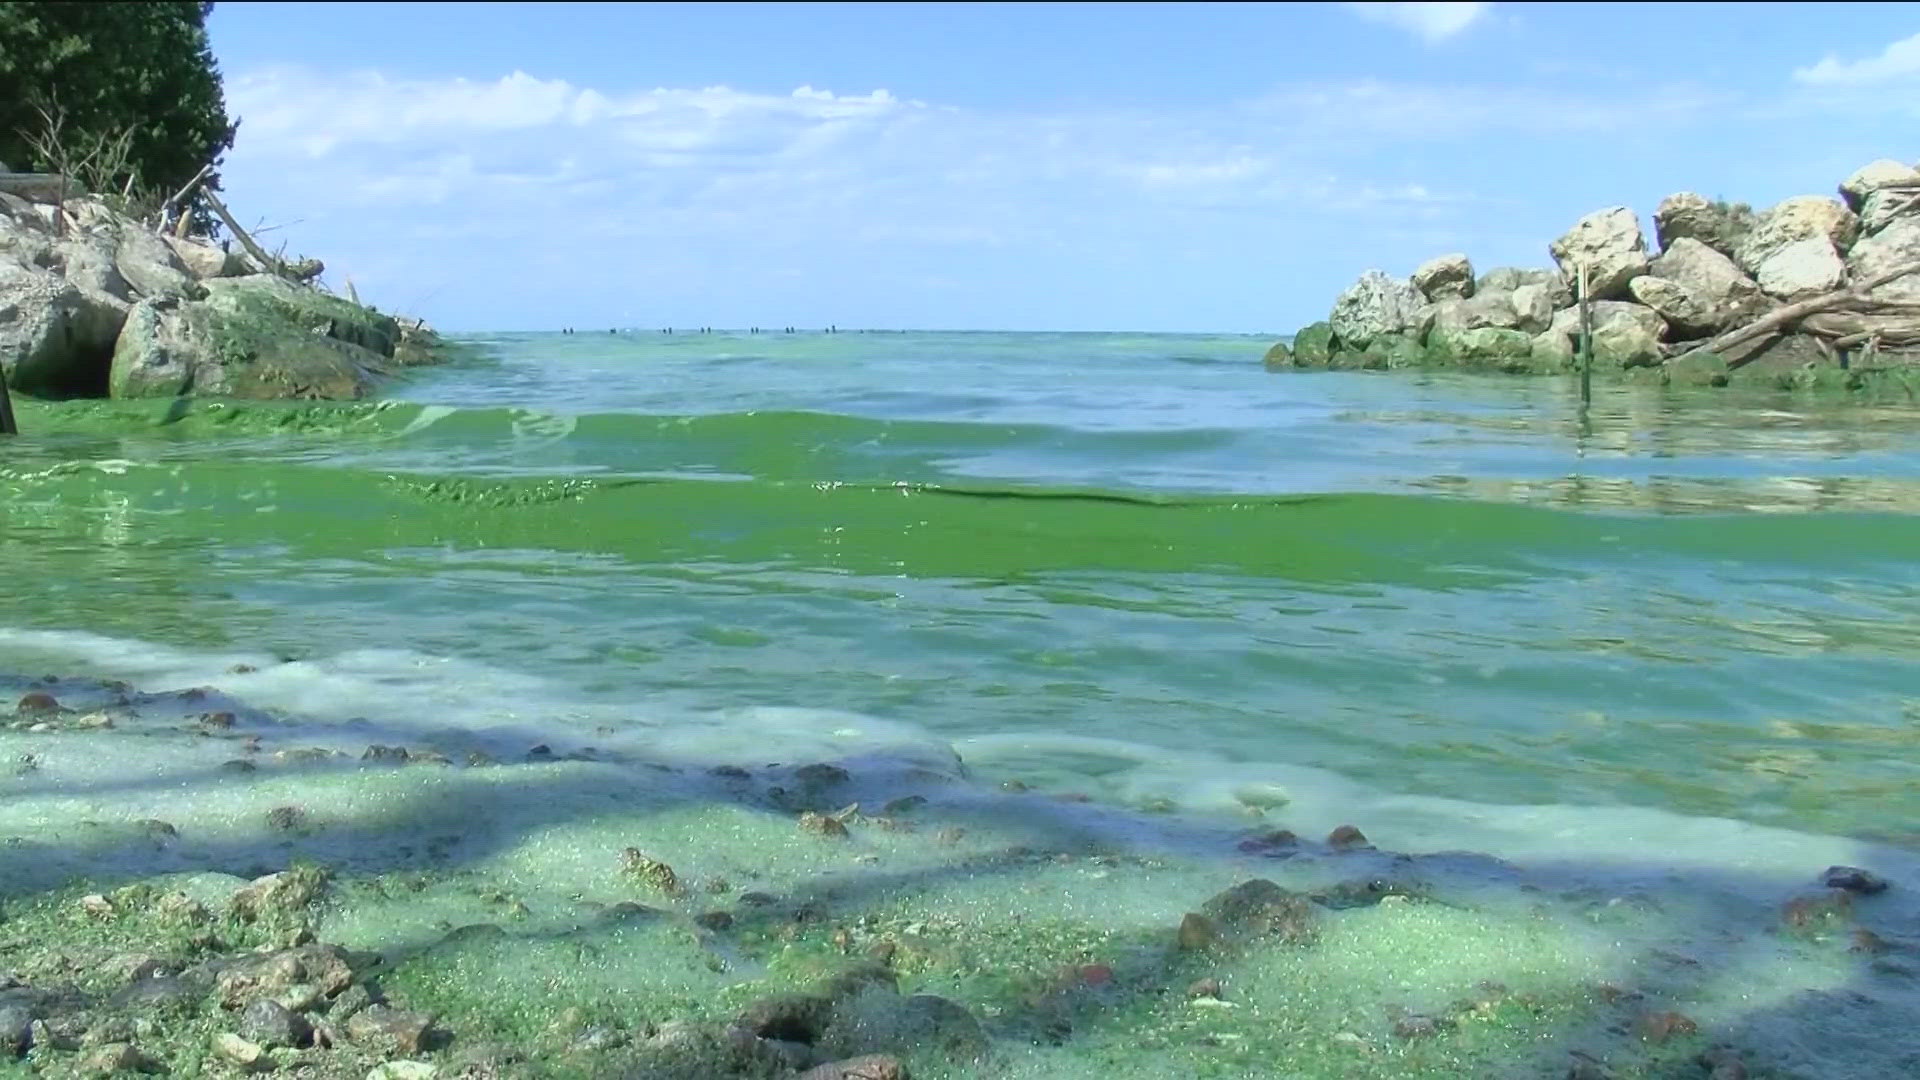 Algal blooms can be more severe with rain. A hot and dry July would limit the bloom. If there's heavy rain in the next few weeks, it could cause a bloom to worsen.